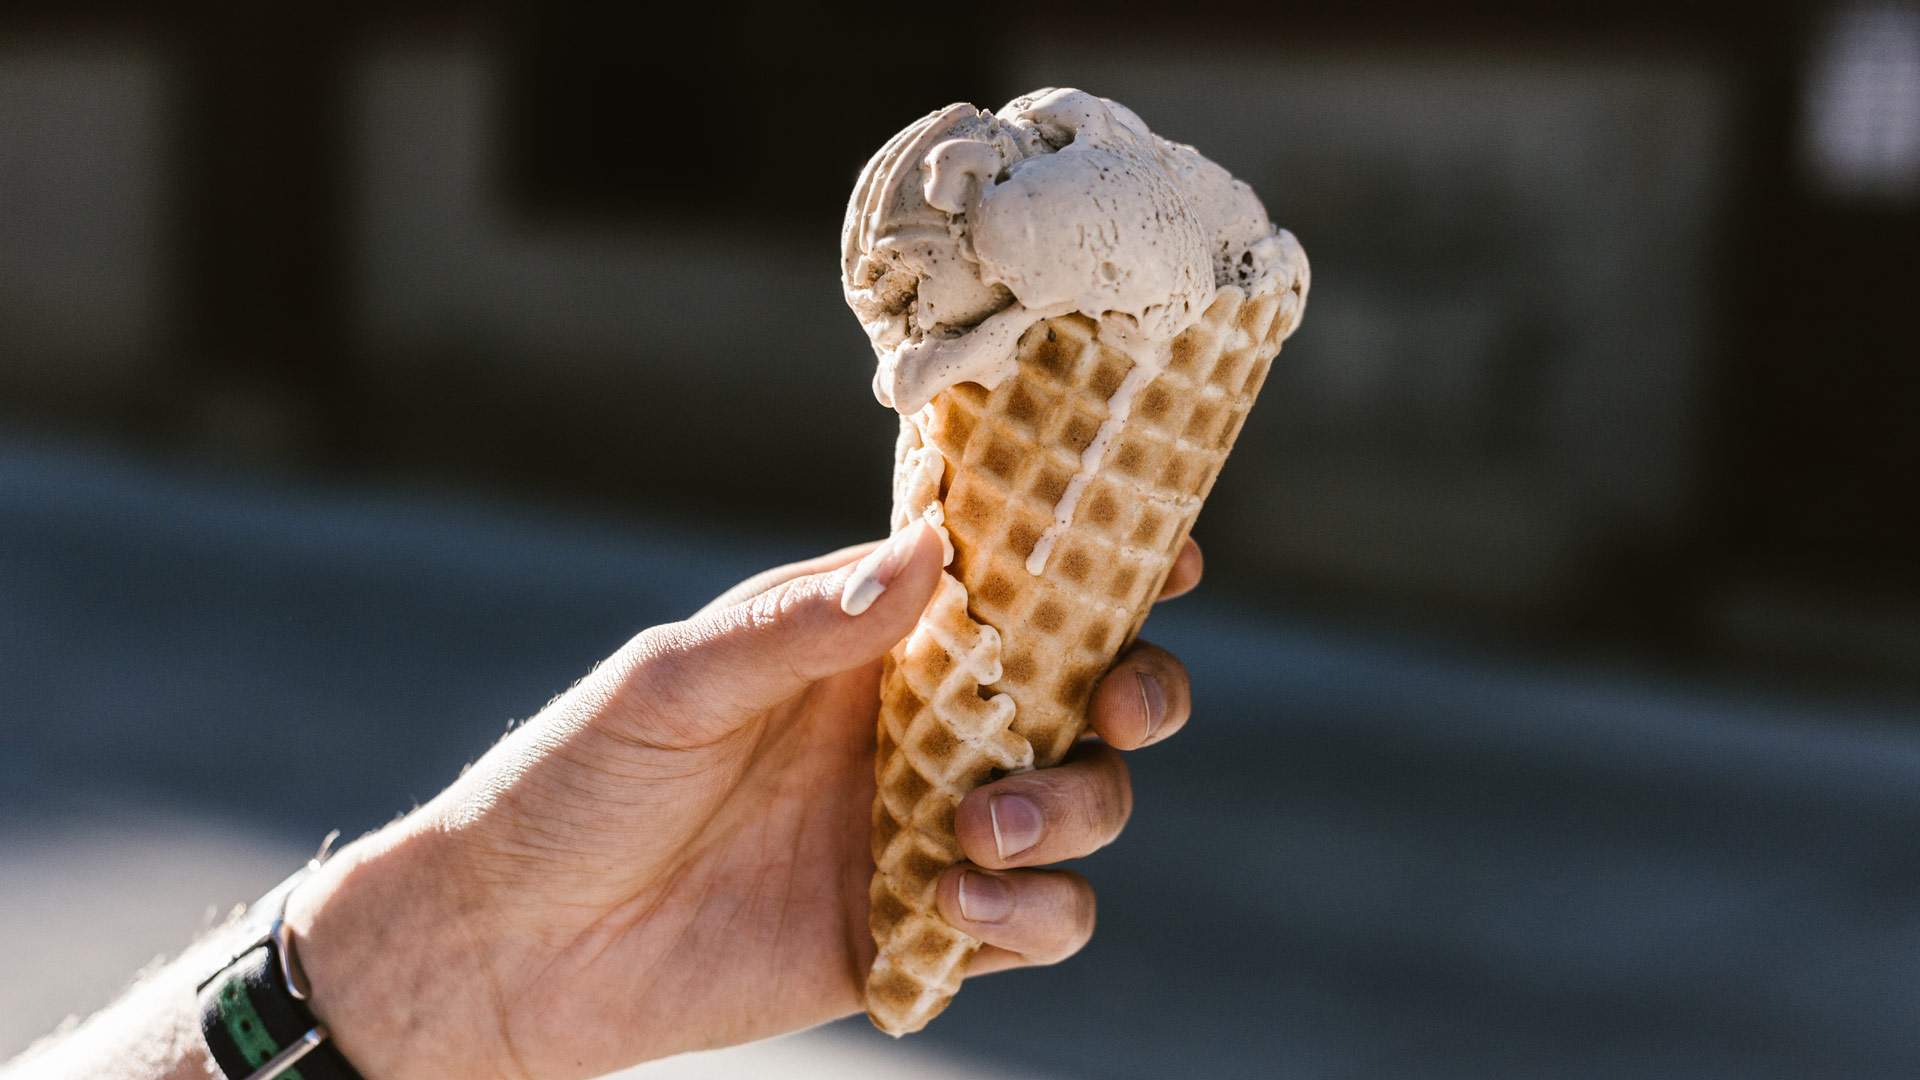 A New Plant-Based Ice Cream Shop Has Opened in Parnell